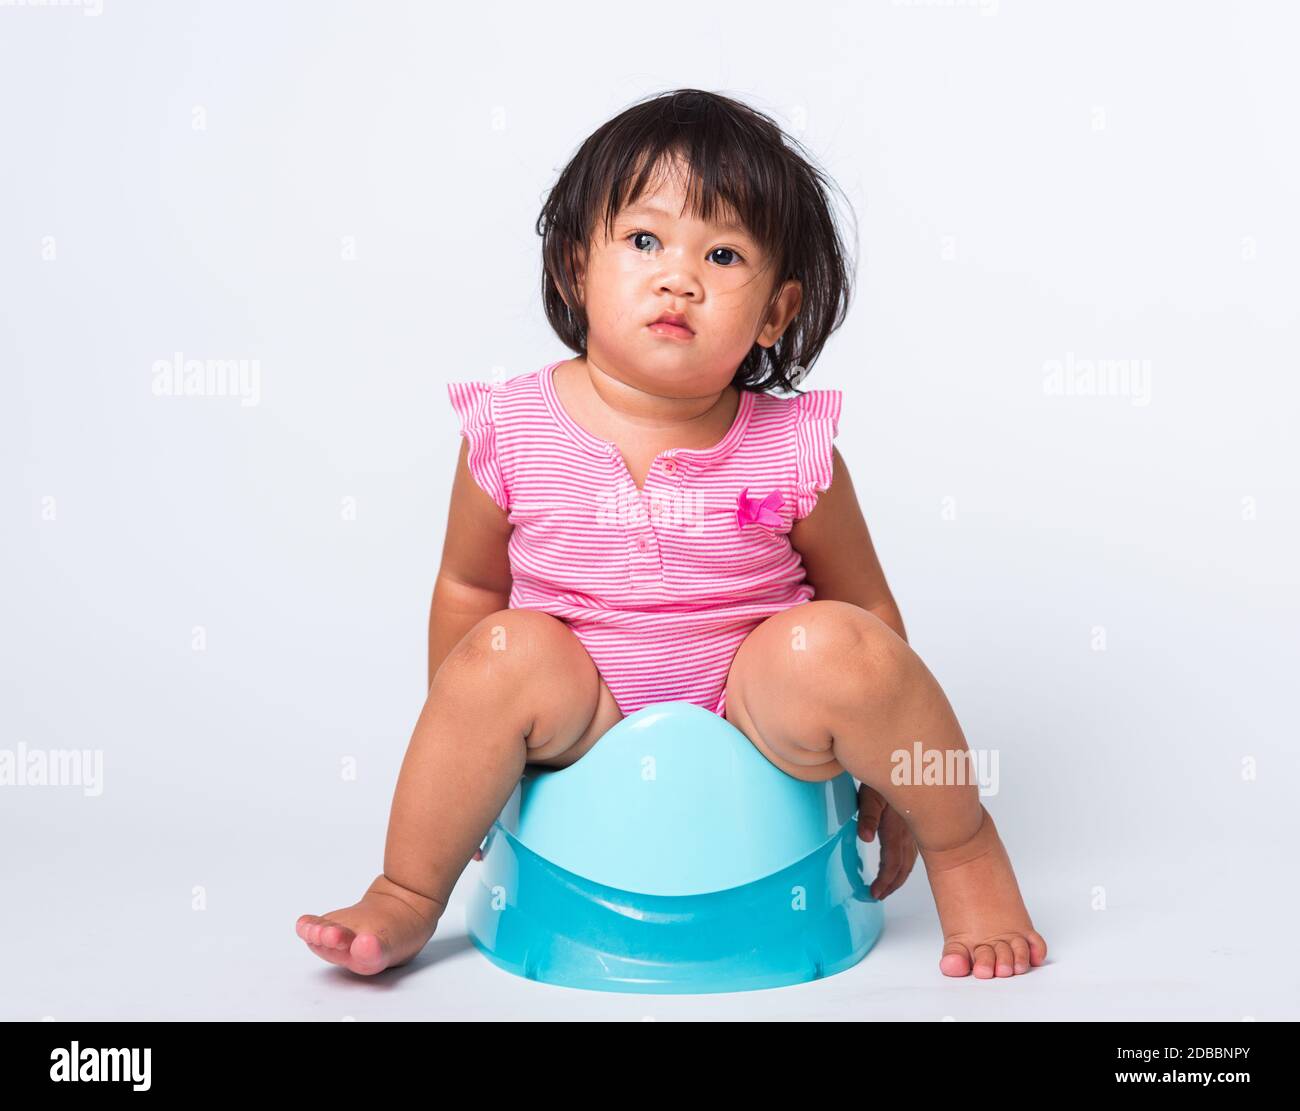 Asian little cute baby child girl education training to sitting on blue chamber pot or potty in, studio shot isolated on white background, wc toilet c Stock Photo